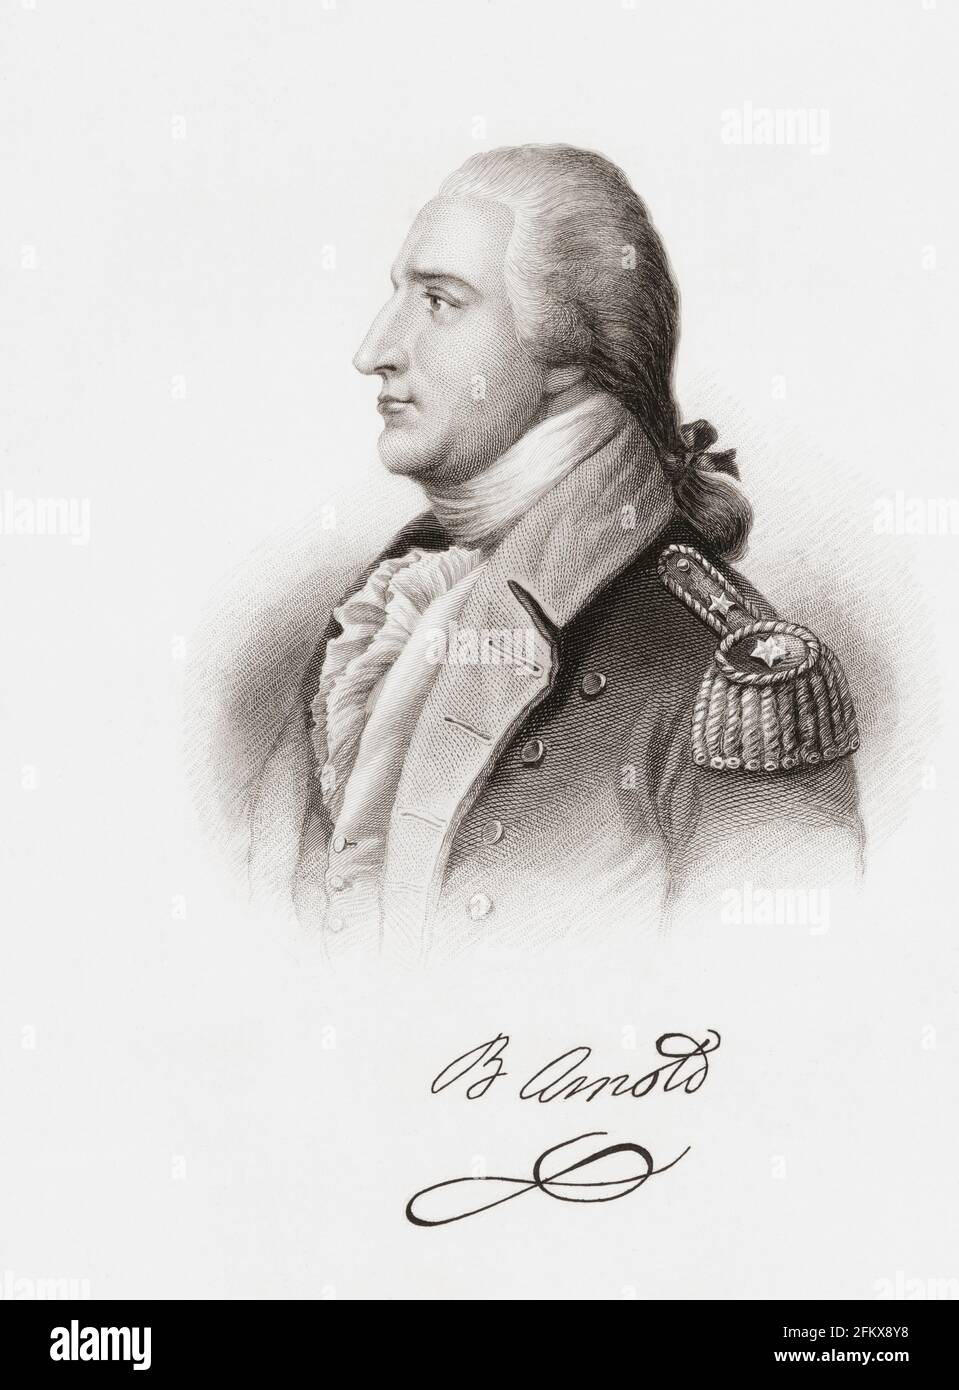 Benedict Arnold V, 1740 to 1801. American general during the American Revolutionary War. Stock Photo